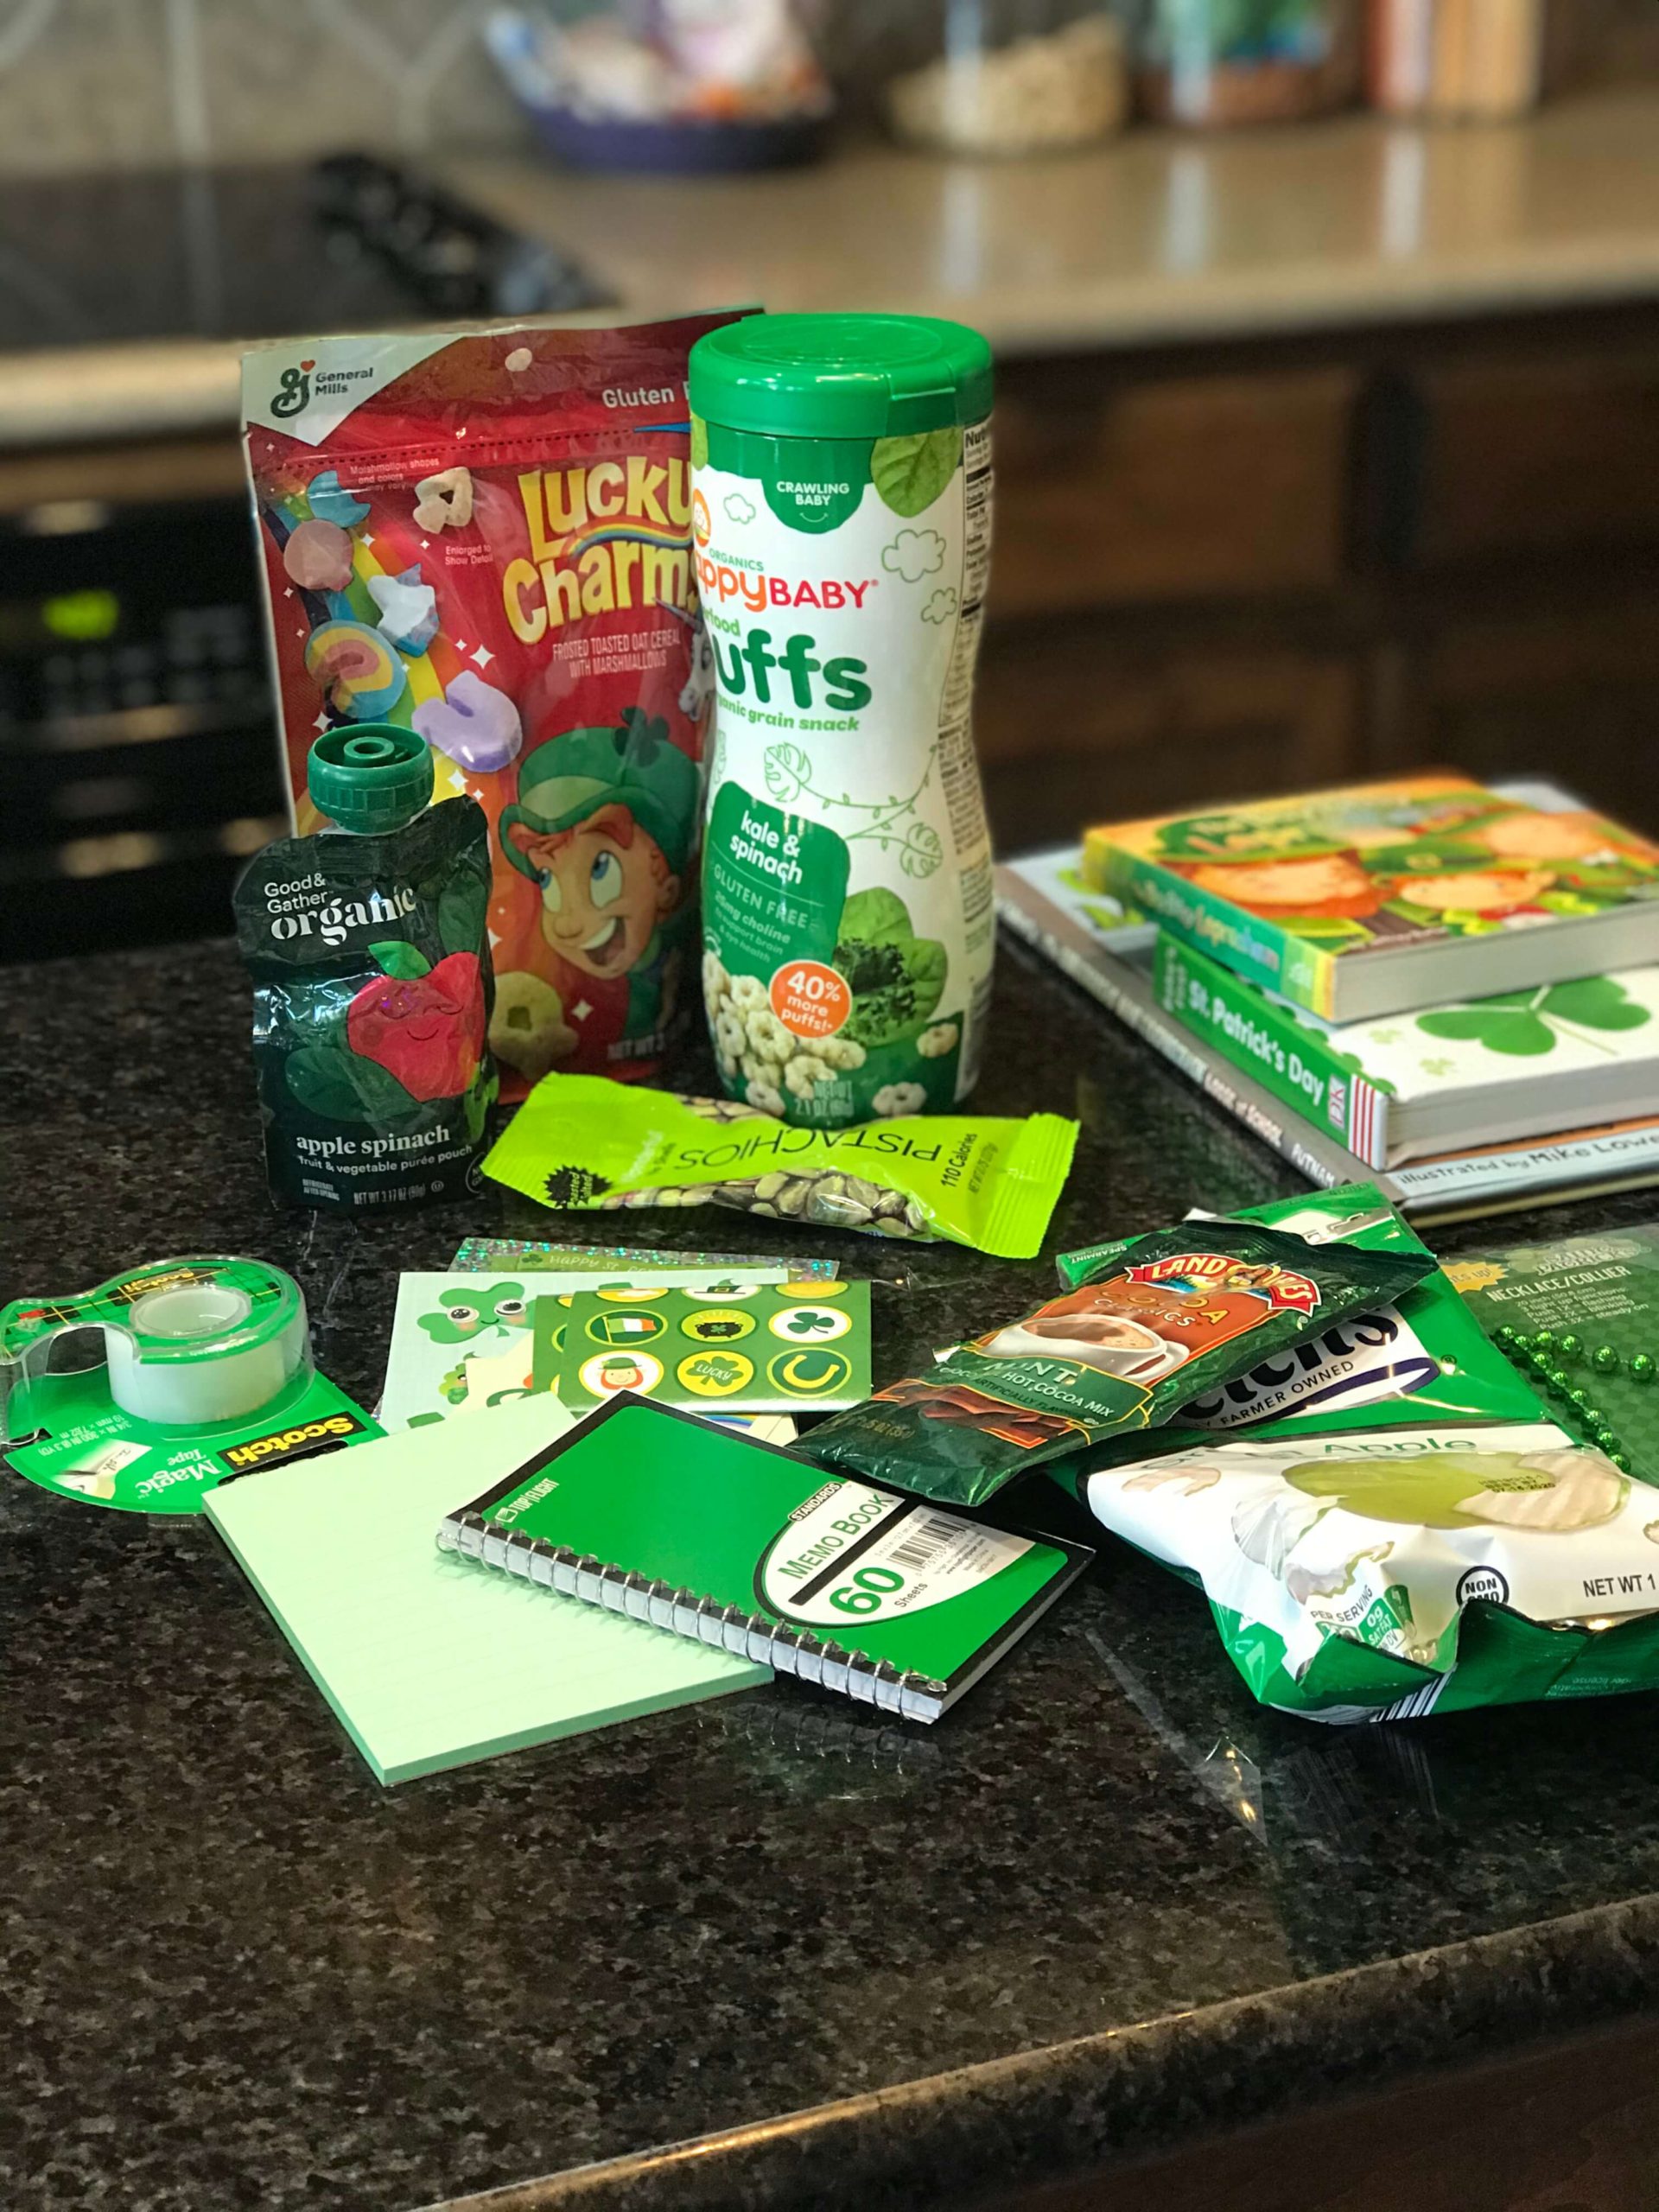 St. Patrick's Day Fun Discover the joy of sending Grammy Boxes/Care Packages to long distance loved ones. A fun way to connect. #Stpatricksday #carepackage